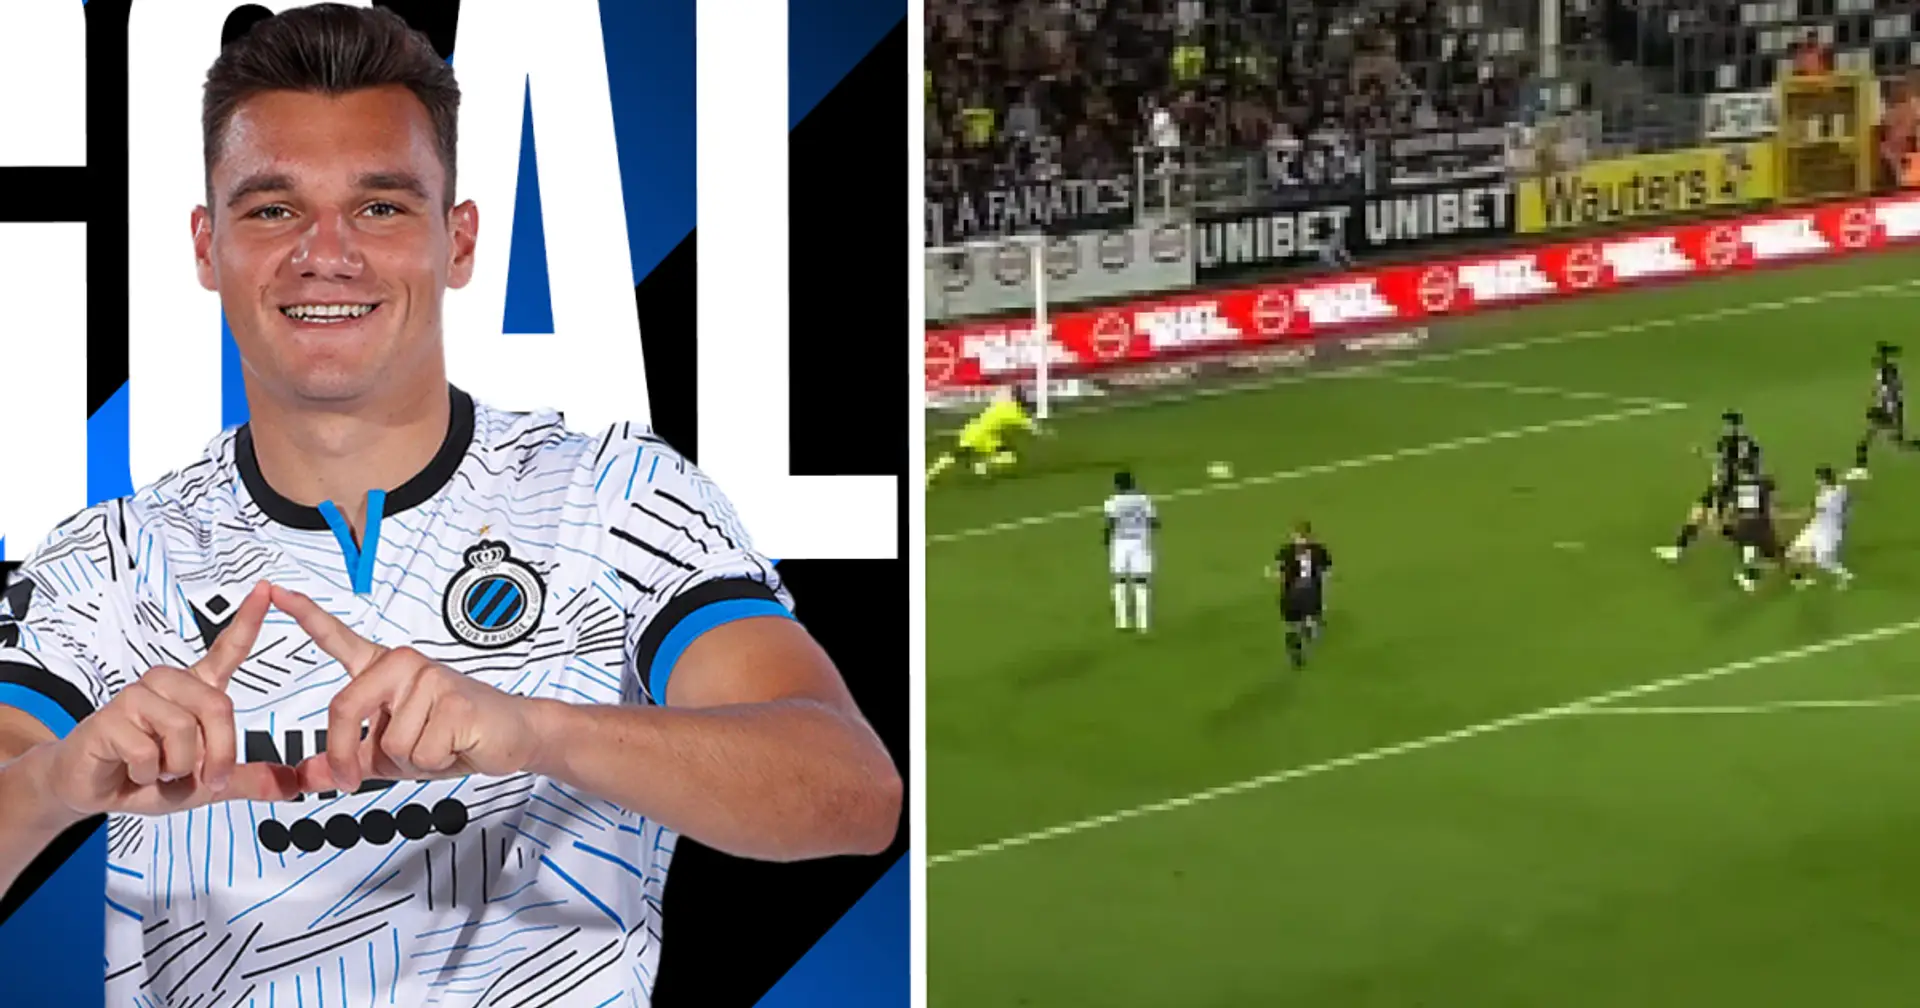 Spotted: Ferran Jutgla scores superb golazo for new club, takes tally to 5 goals in 6 games